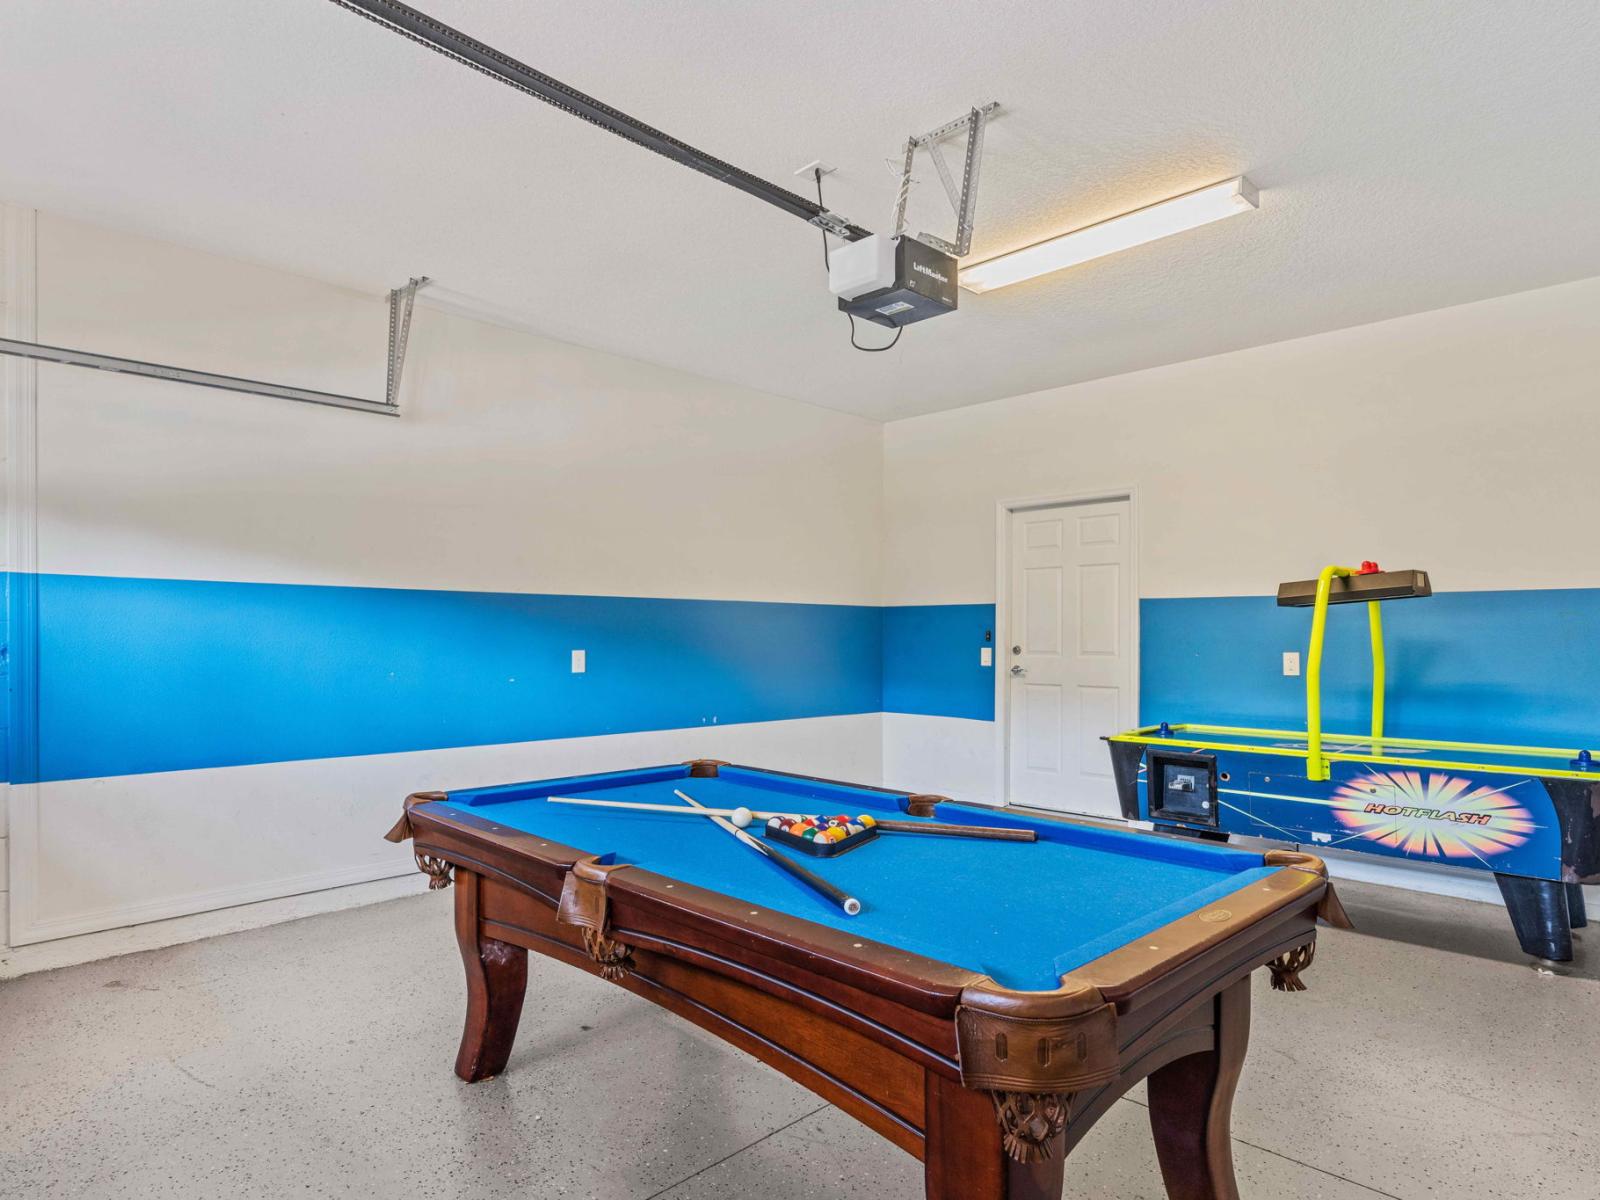 Pool table and a Air hockey table